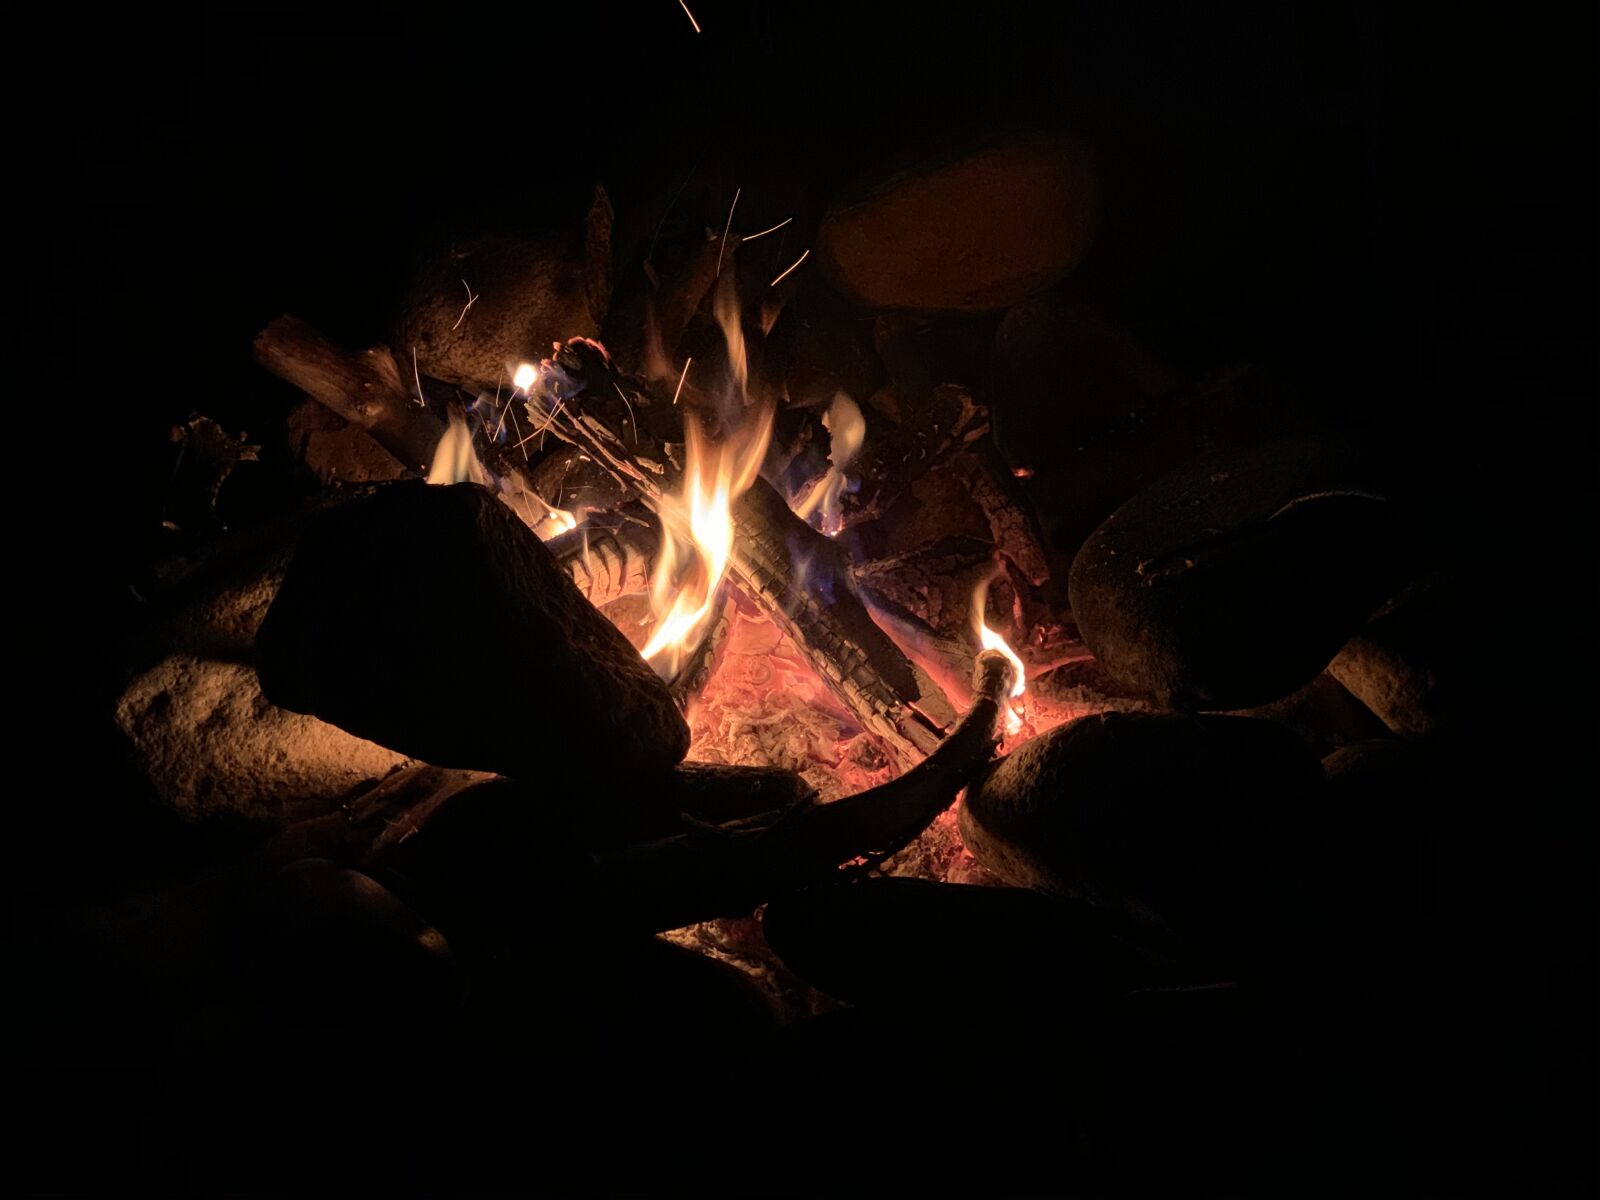 iPhone XS back dual camera 6mm f/2.4 sample photo. Bonfire, wilderness life, atmospheric photography